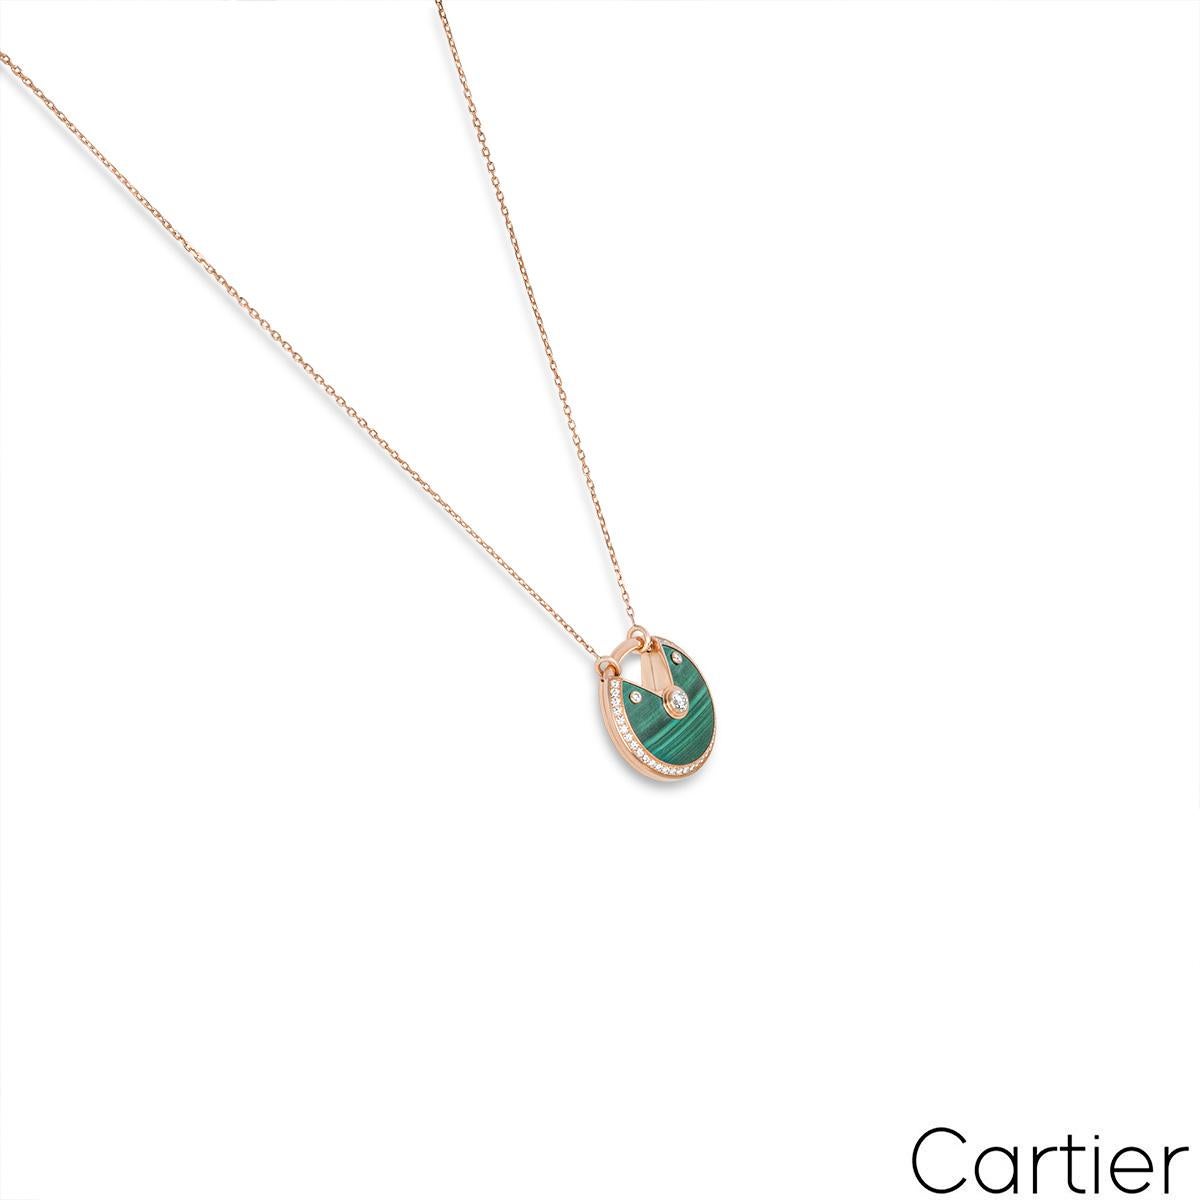 A beautiful 18k rose gold malachite and diamond necklace from the Amulette de Cartier collection. The large pendant comprises of a circular talisman set with malachite, complemented by 39 round brilliant cut diamonds totalling approximately 0.58ct,